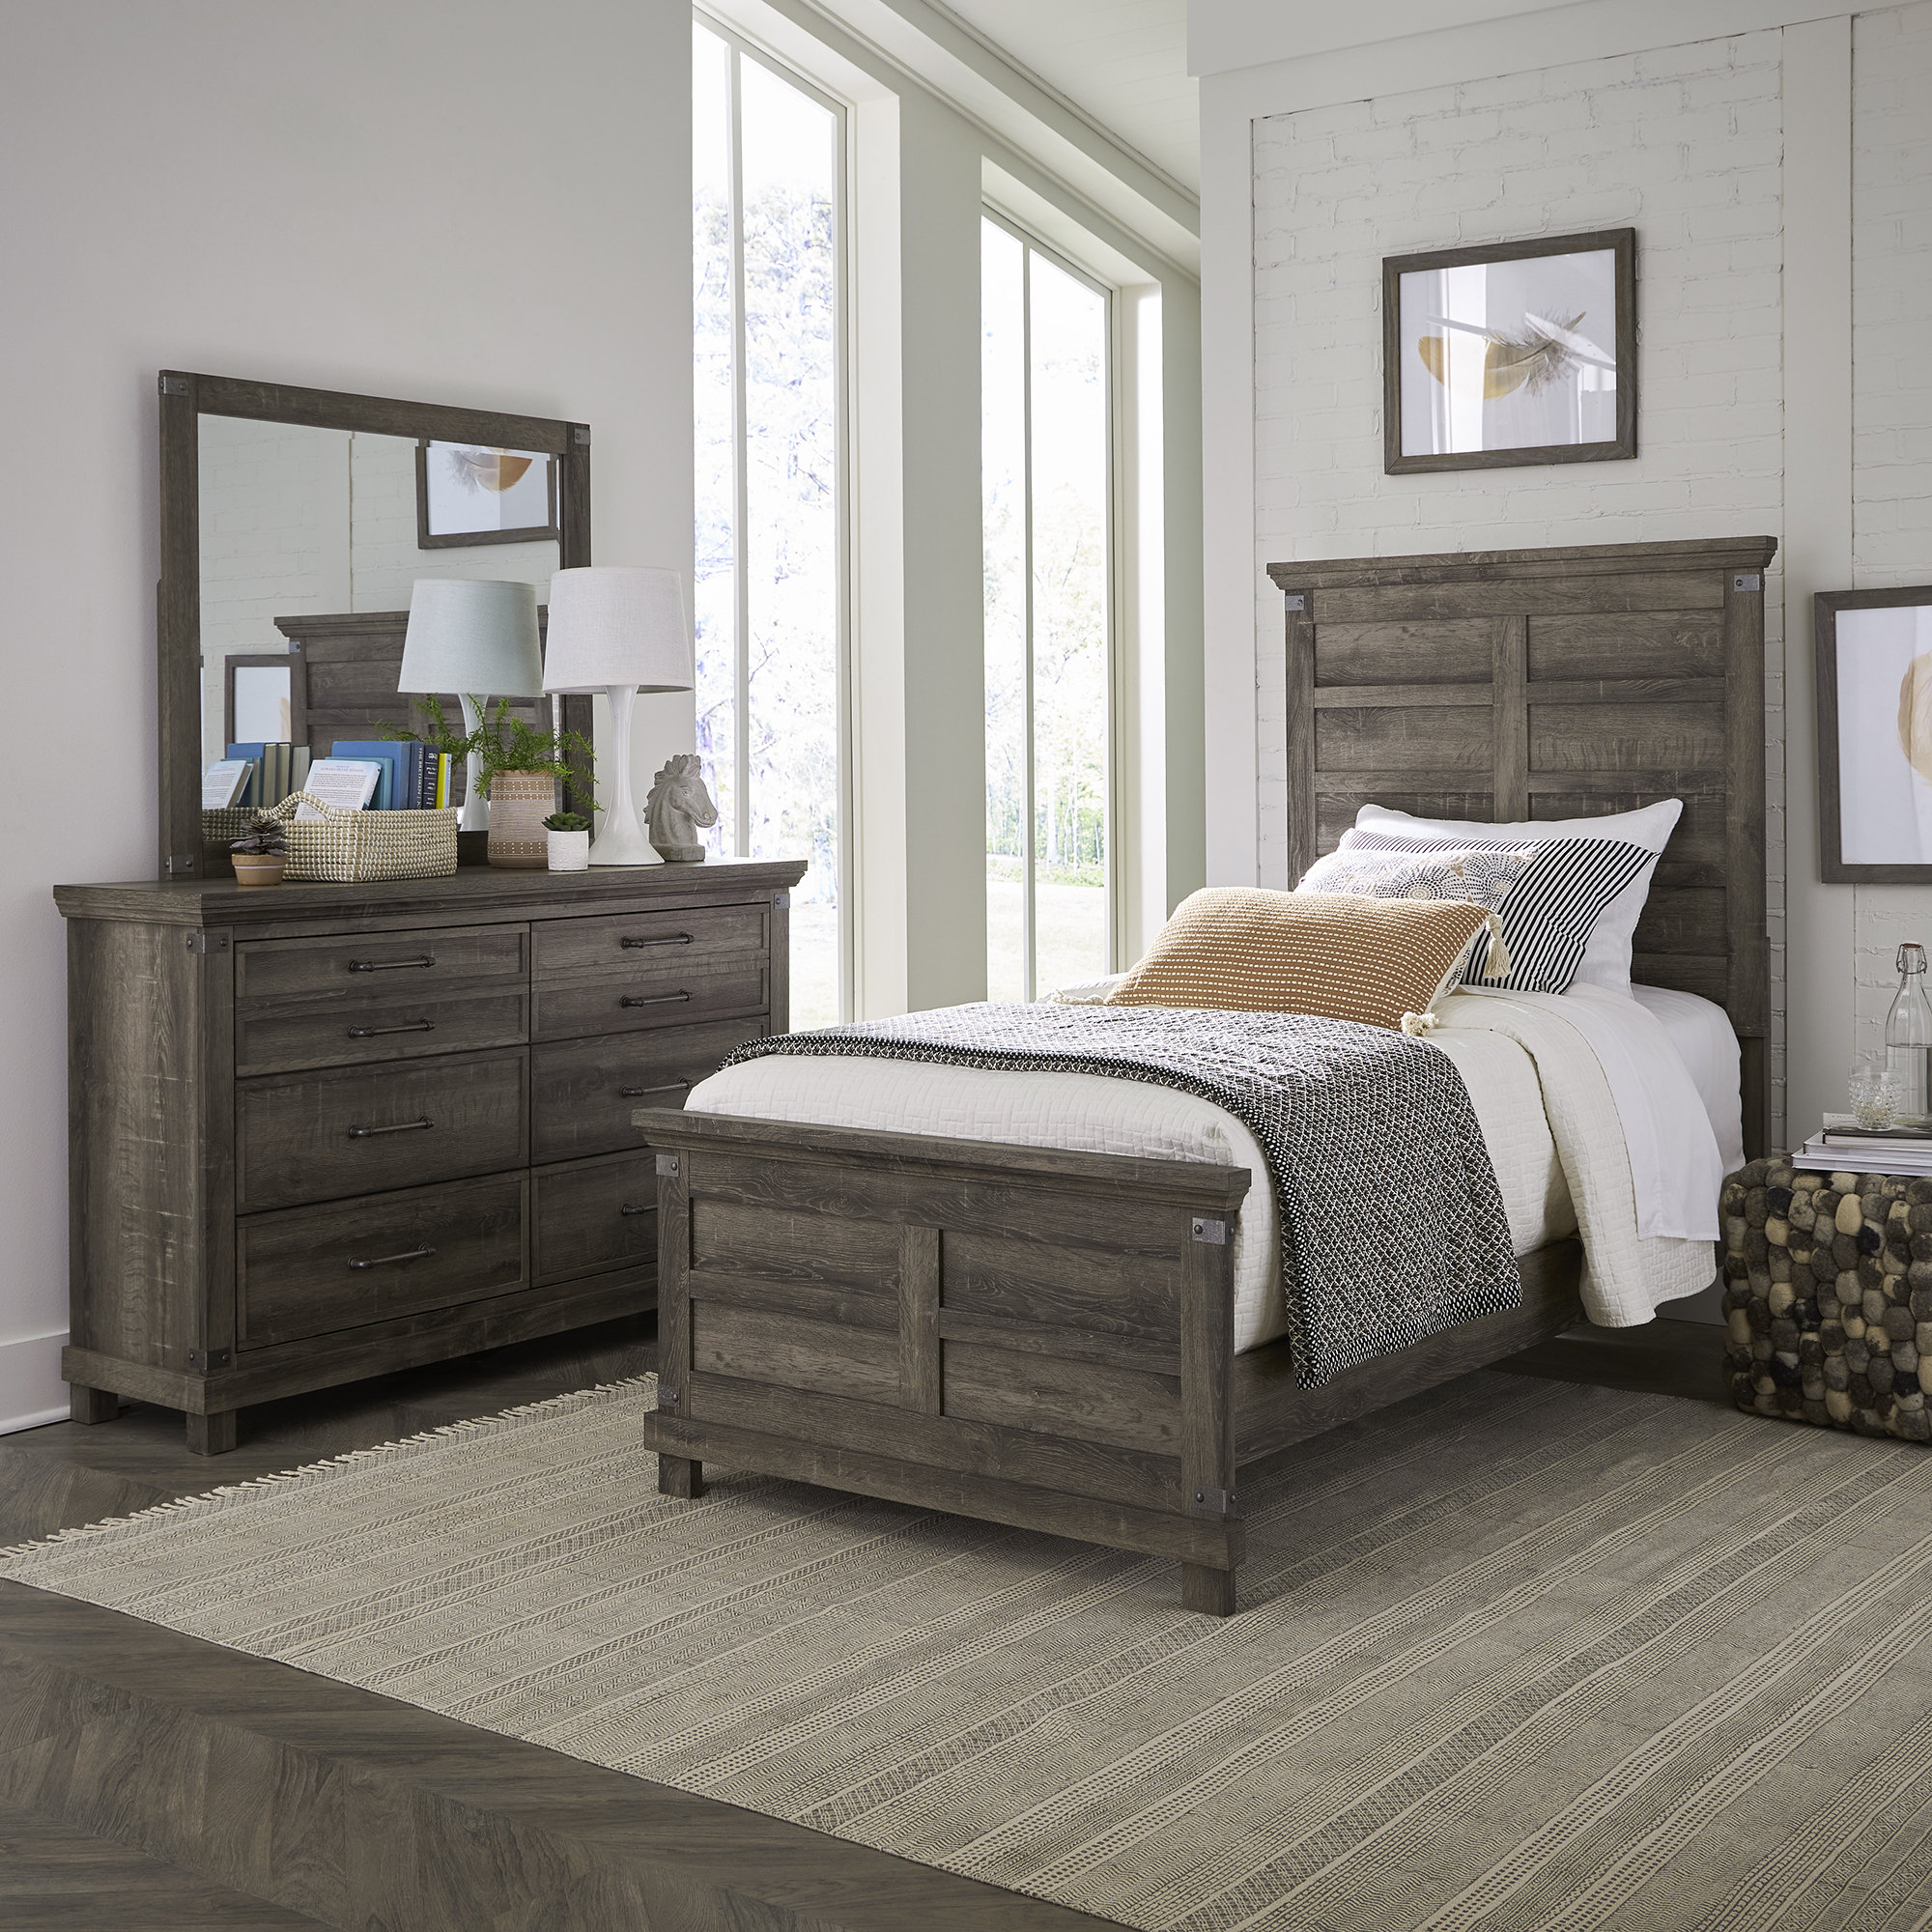 Lakeside Bedroom Set (Clearance) - Amish Direct Furniture